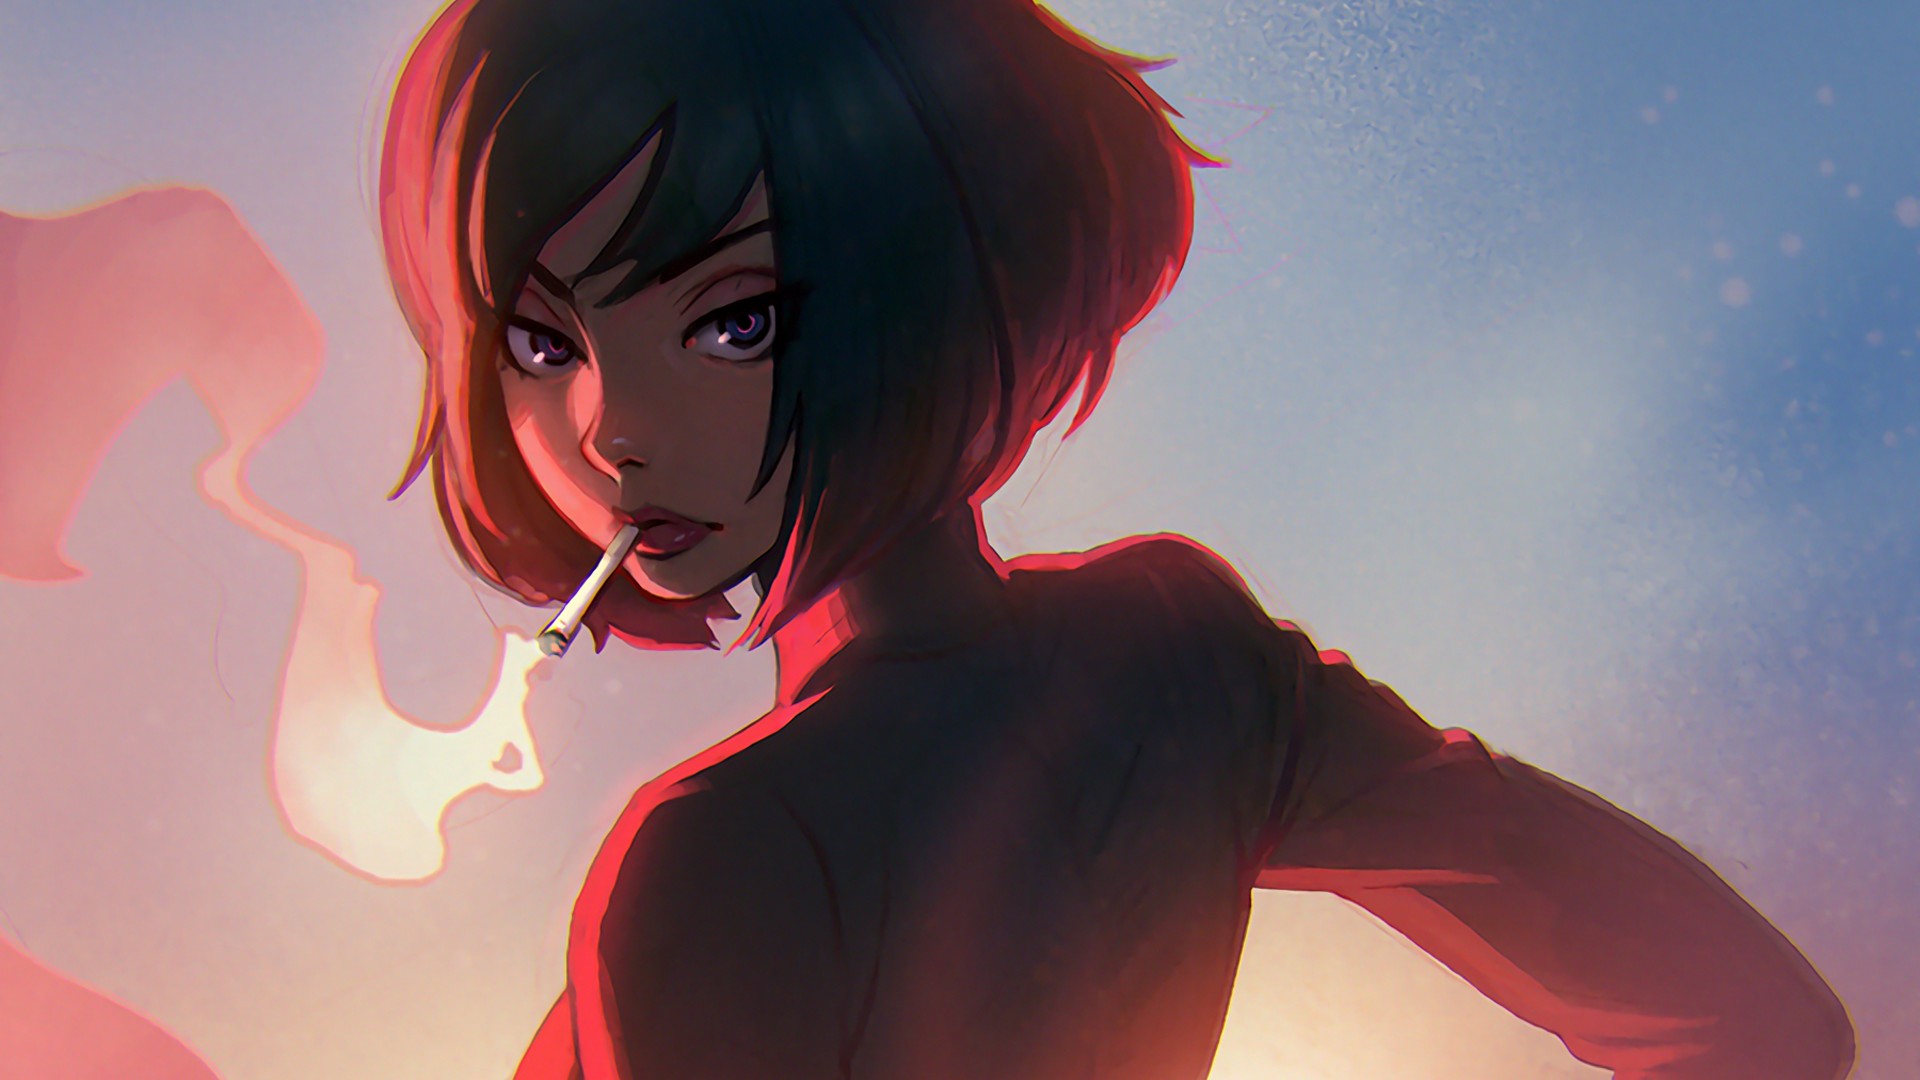 10. "Anime Girl with Blue and Red Hair and Heterochromia" by Kuvshinov Ilya - wide 5